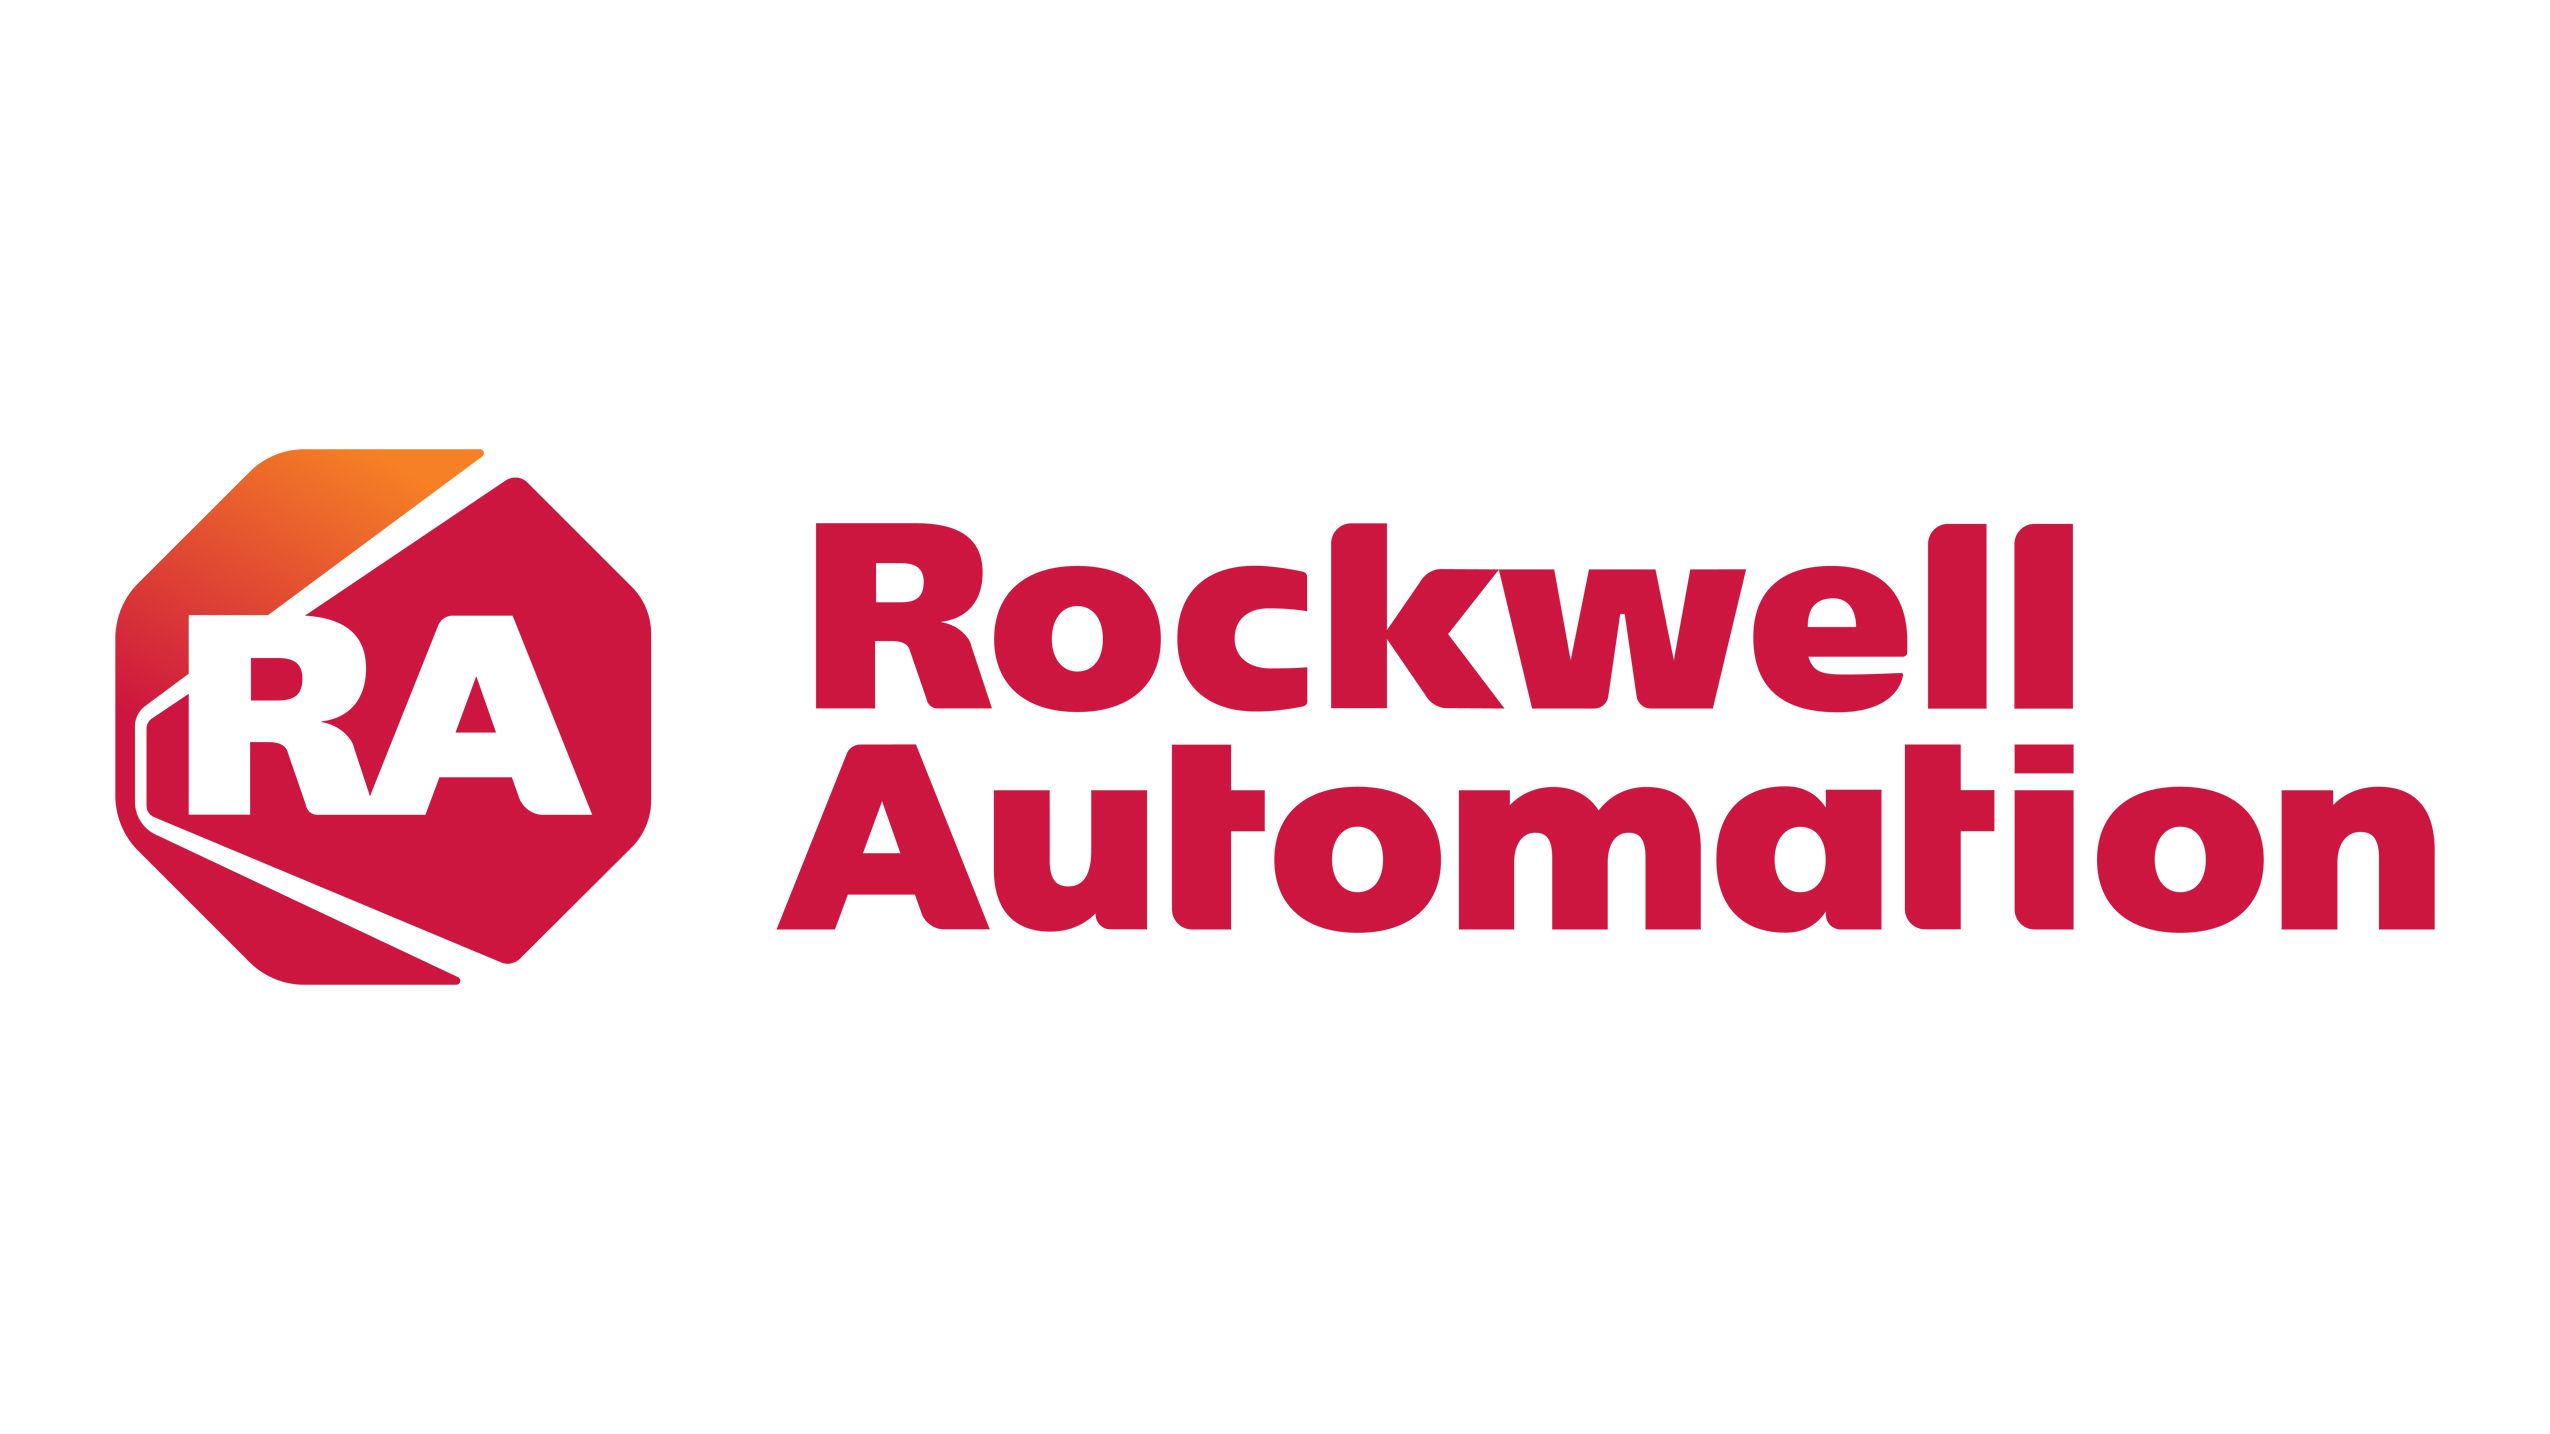 Media Resources | Rockwell Automation
